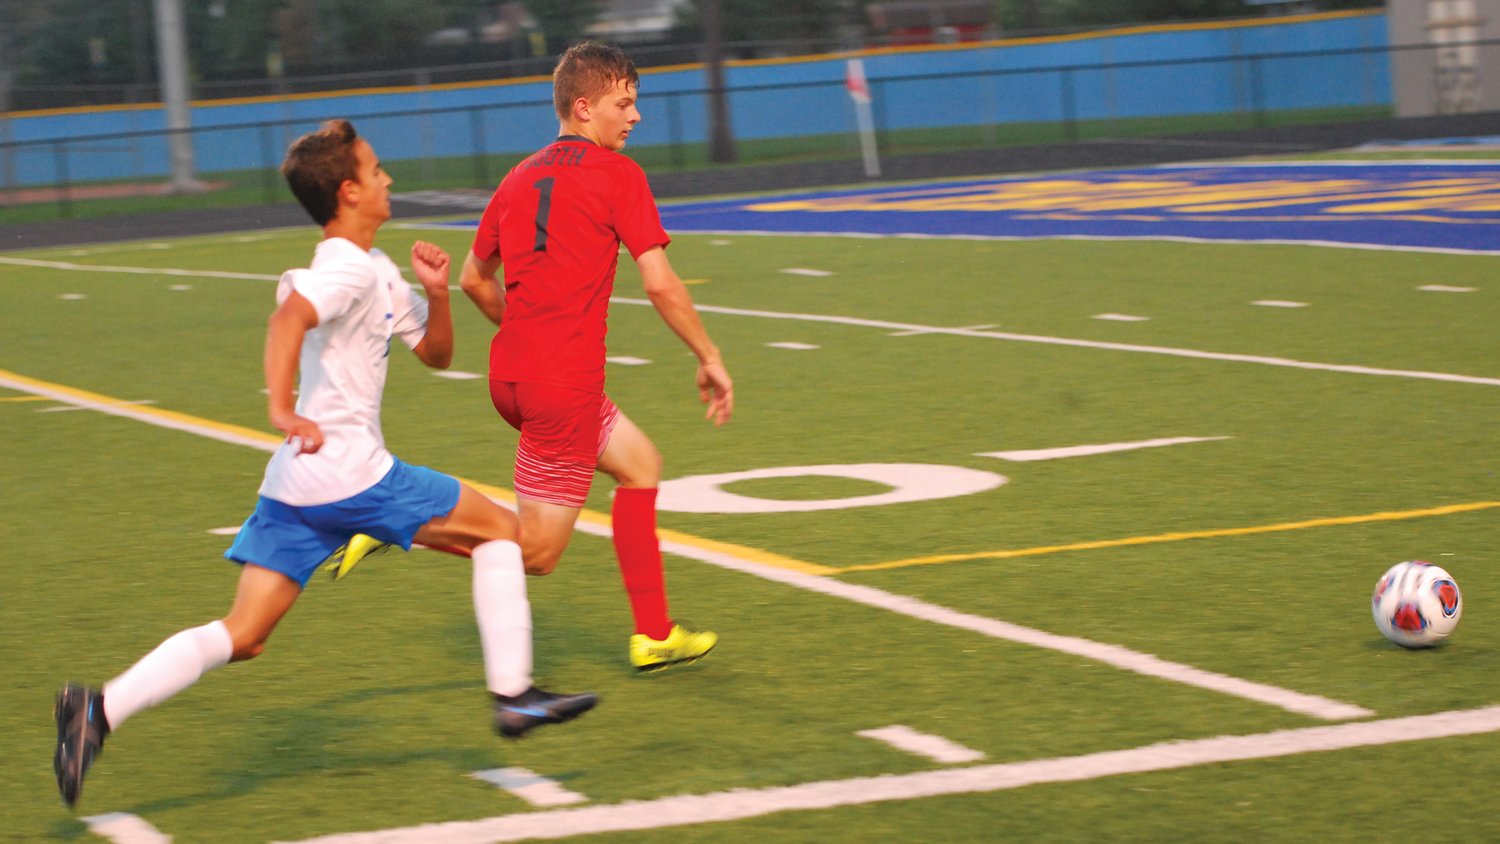 Southmont defender Silas Adams tries to beat a Frankfort striker to the ball on Monday night during the sectional at Crawfordsville.